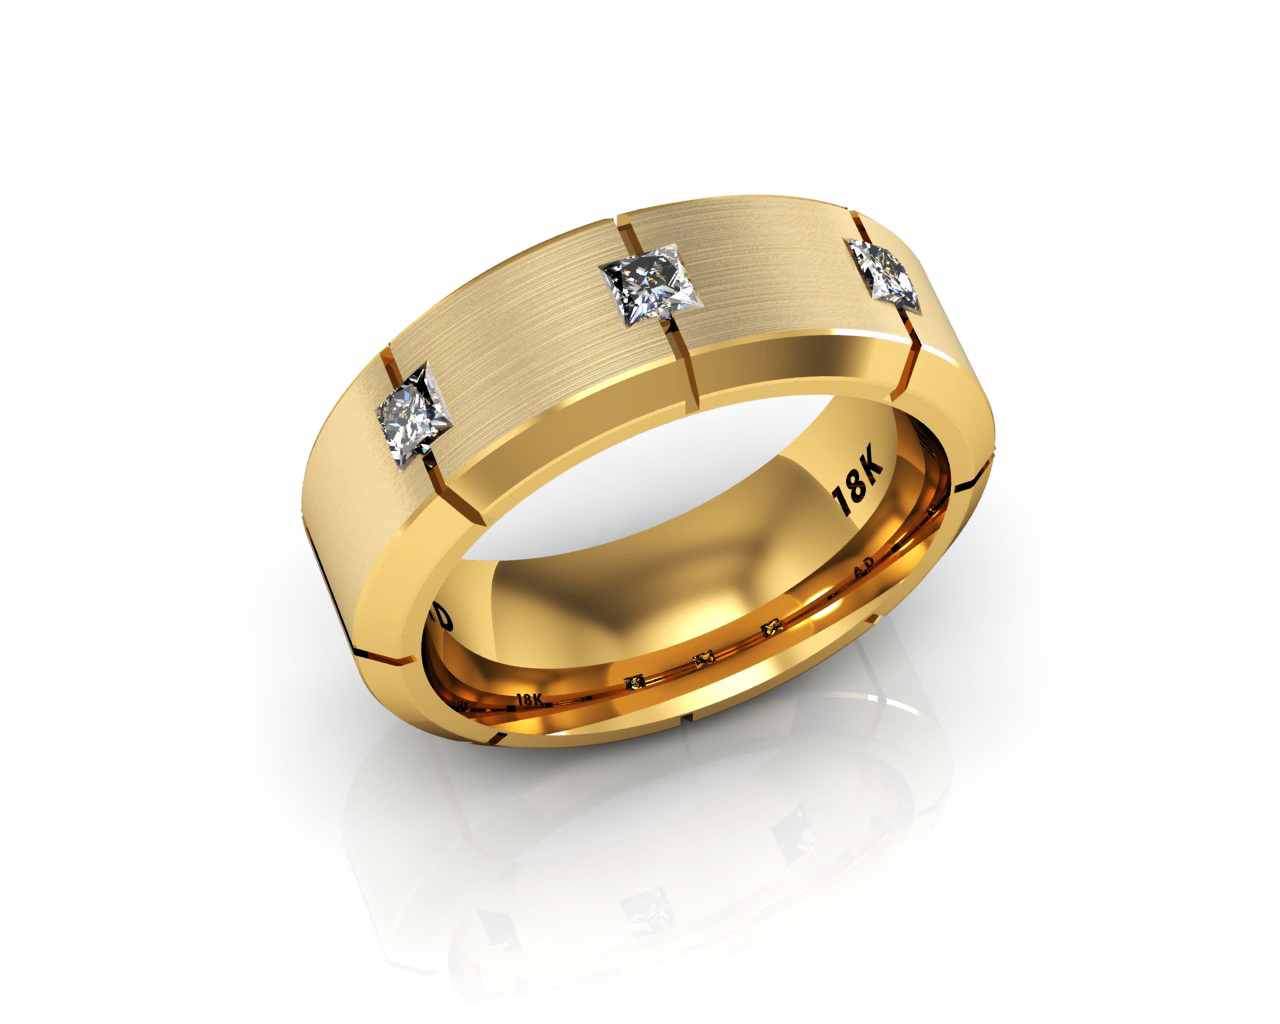 8 Stone Diamond and Gold Men's Wedding Bands